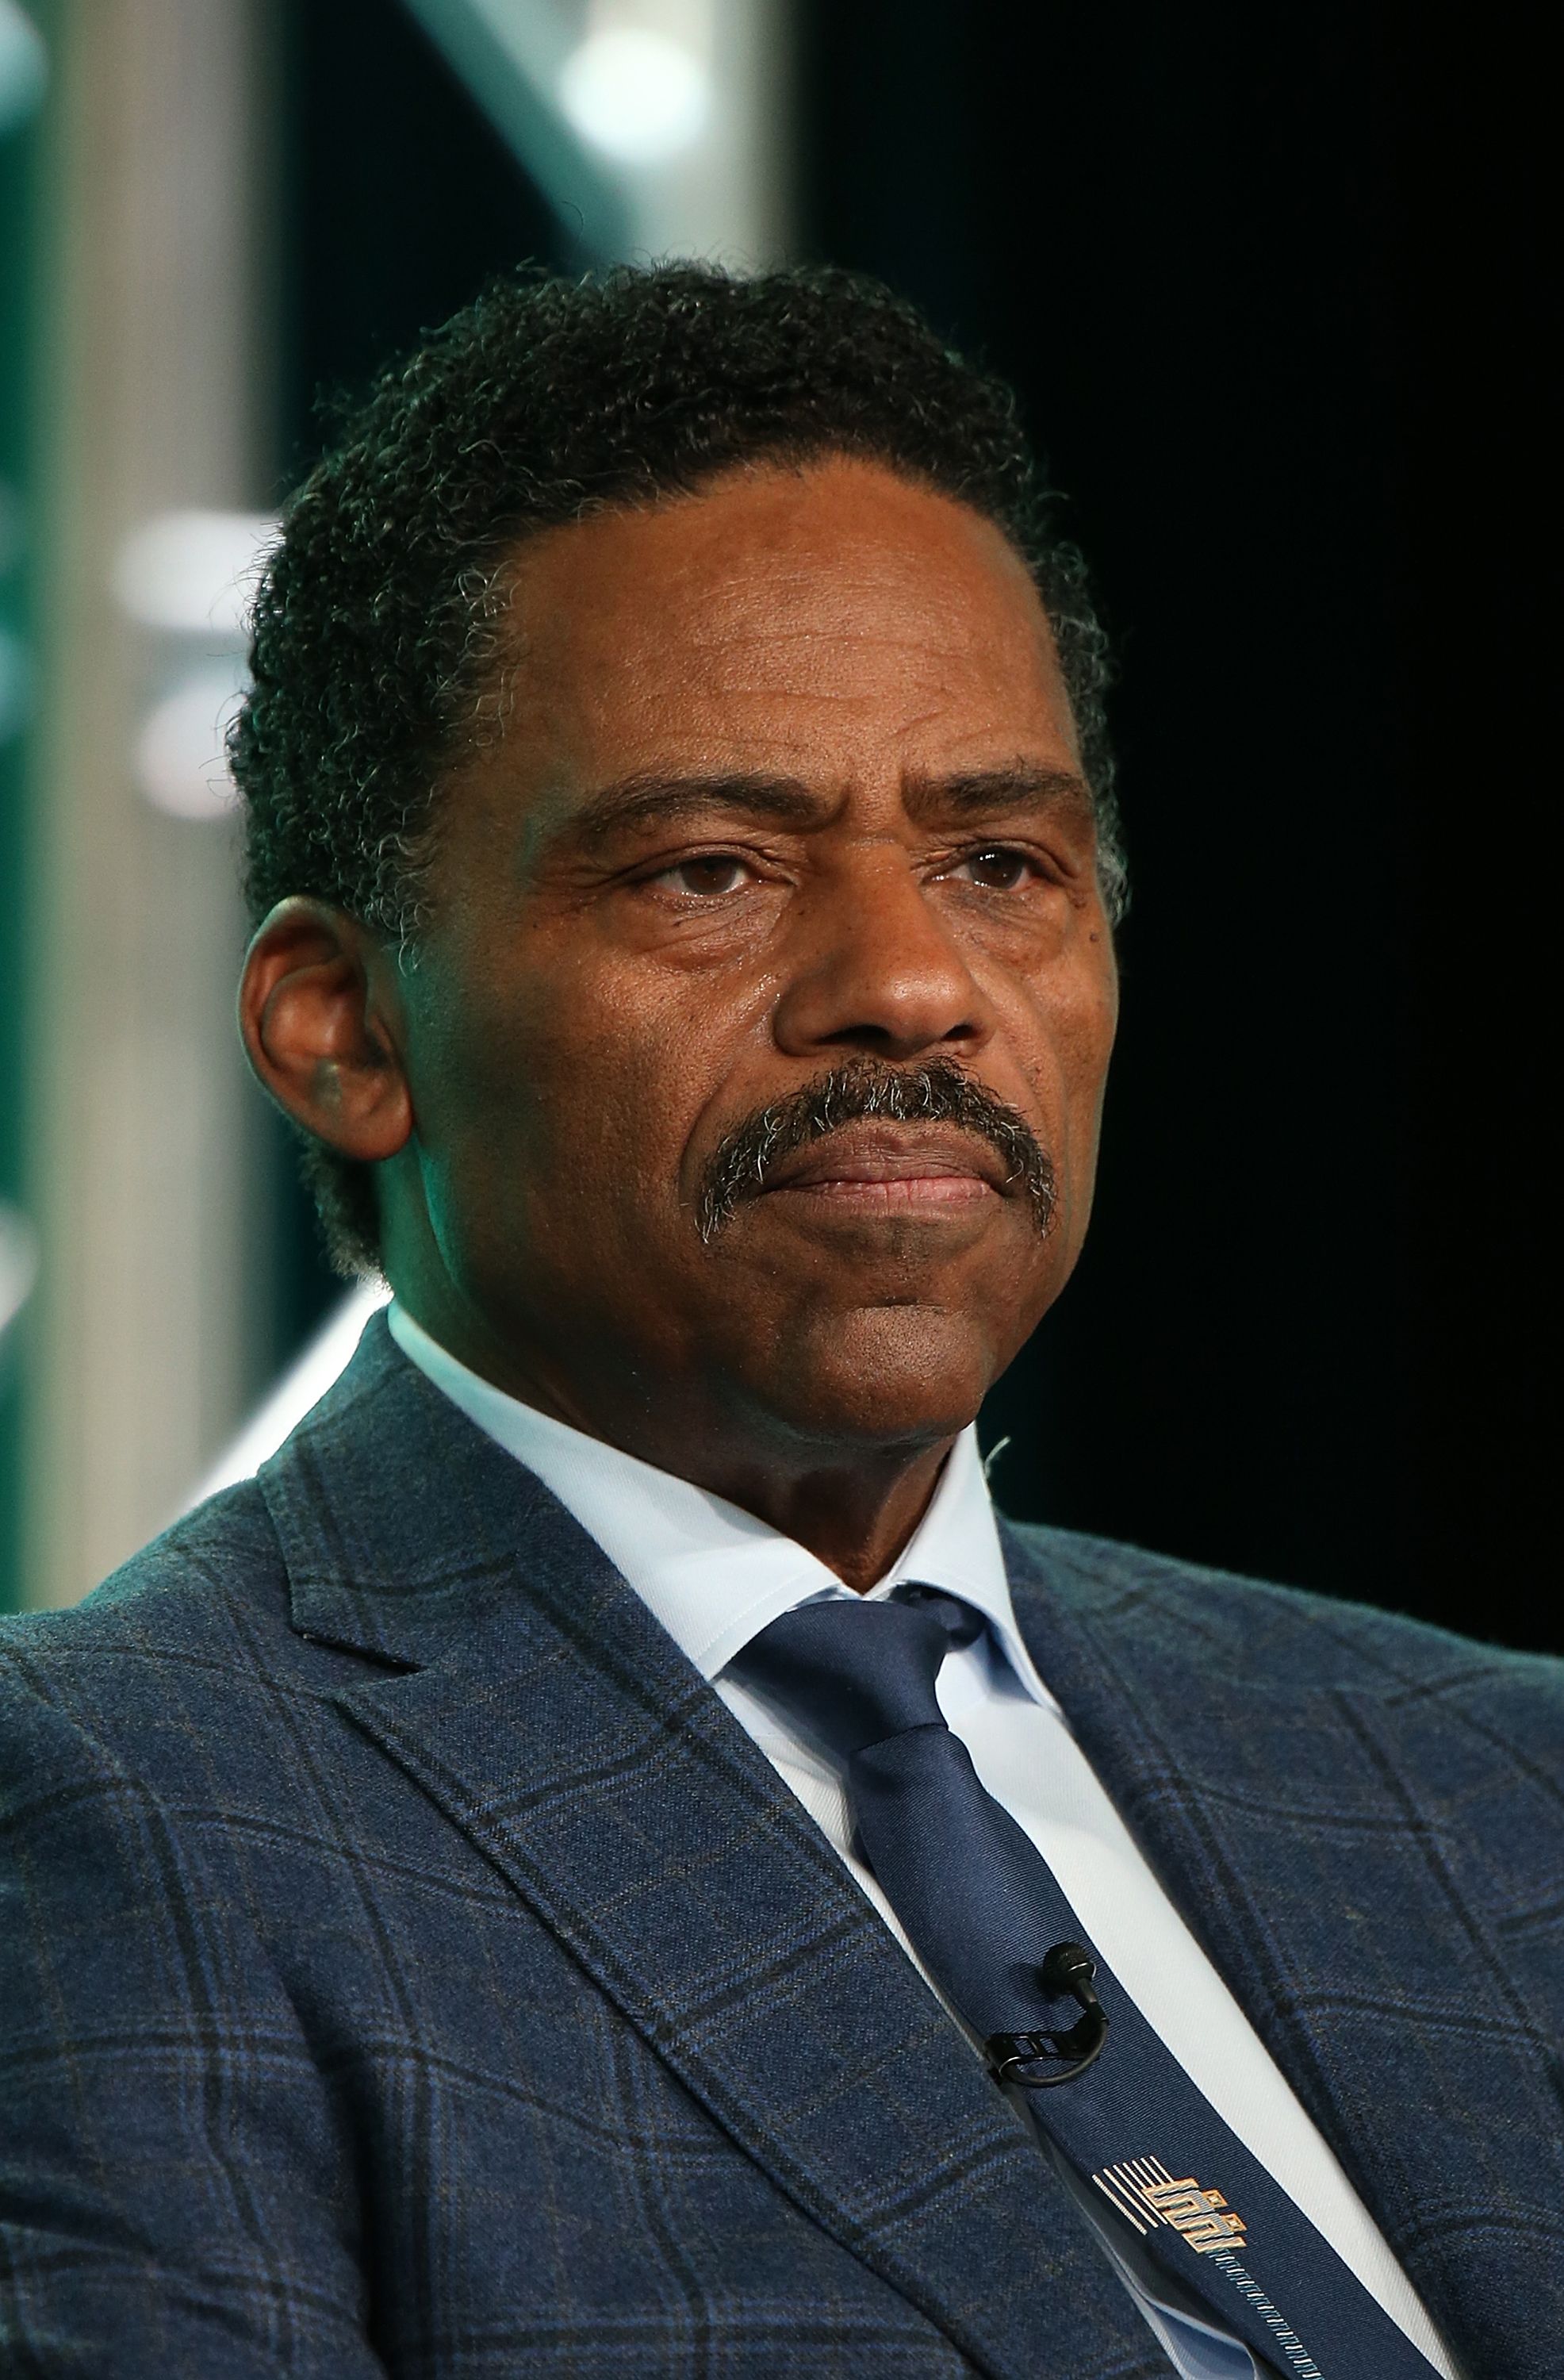  Richard Lawson speaks onstage at the 2018 Winter TCA in 2018 in Pasadena, California | Source: Getty Images